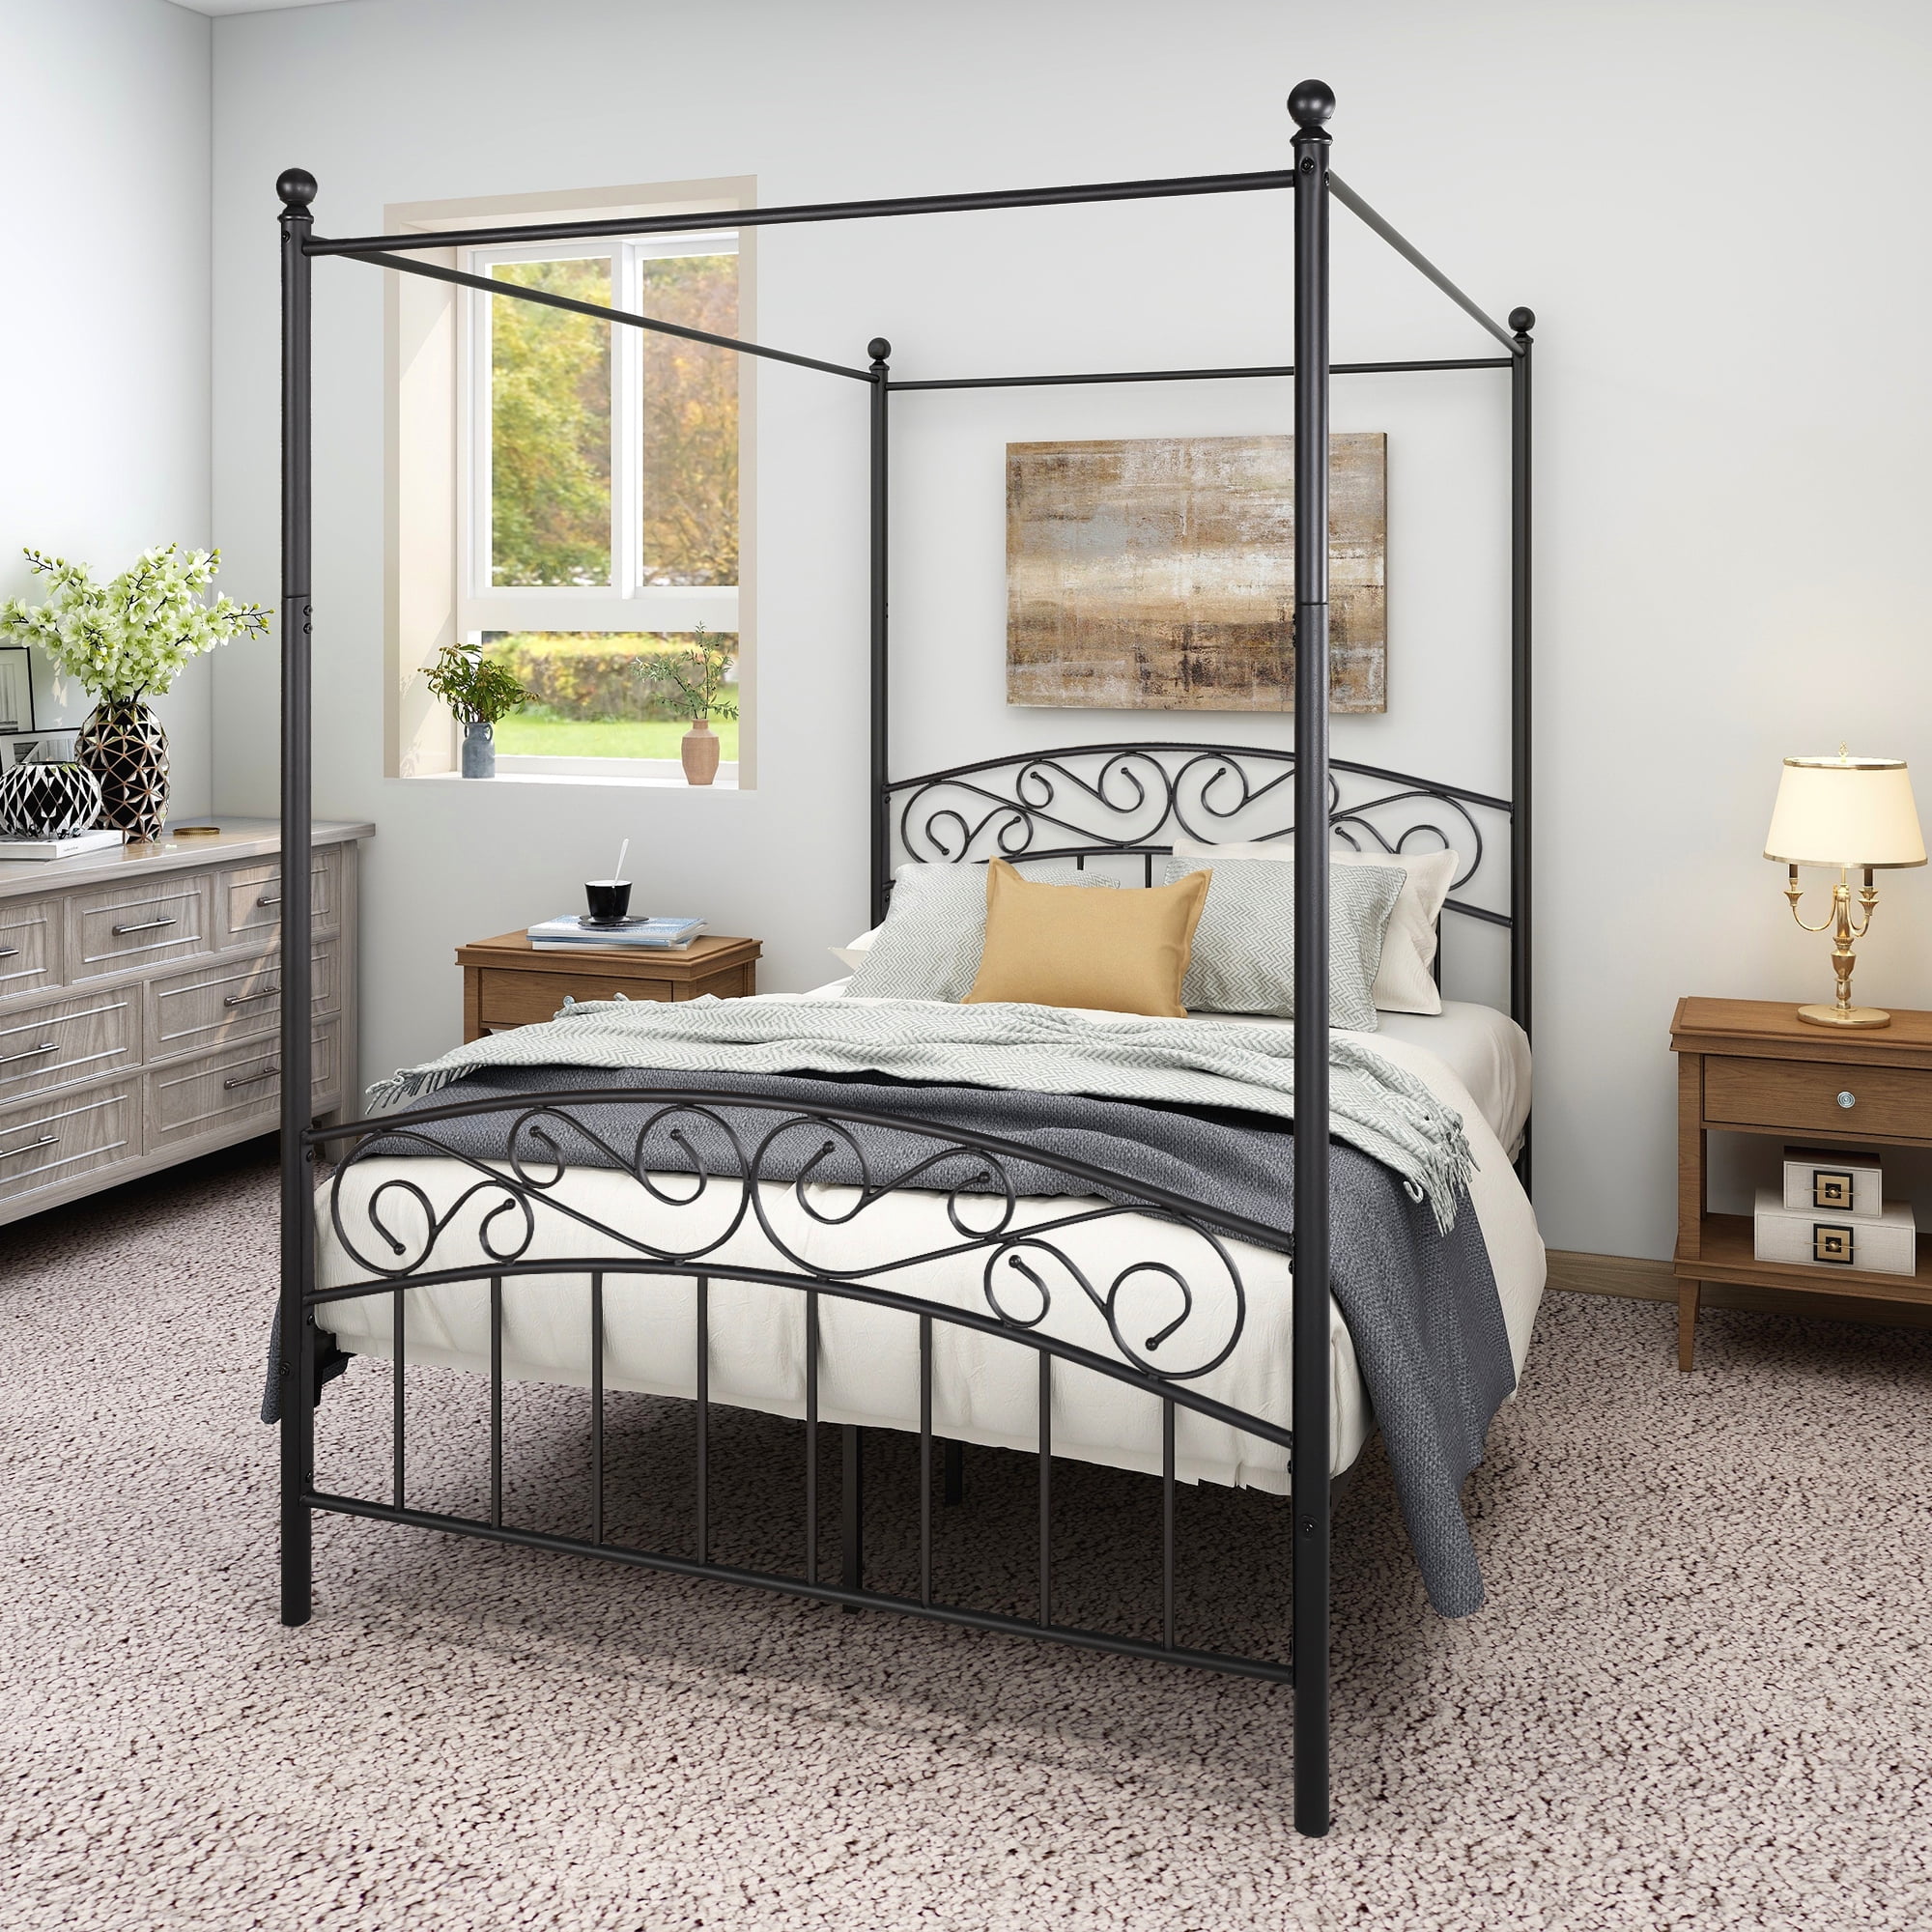 Saibaiyee Metal Canopy Bed Frame With, European Style Bed Frame